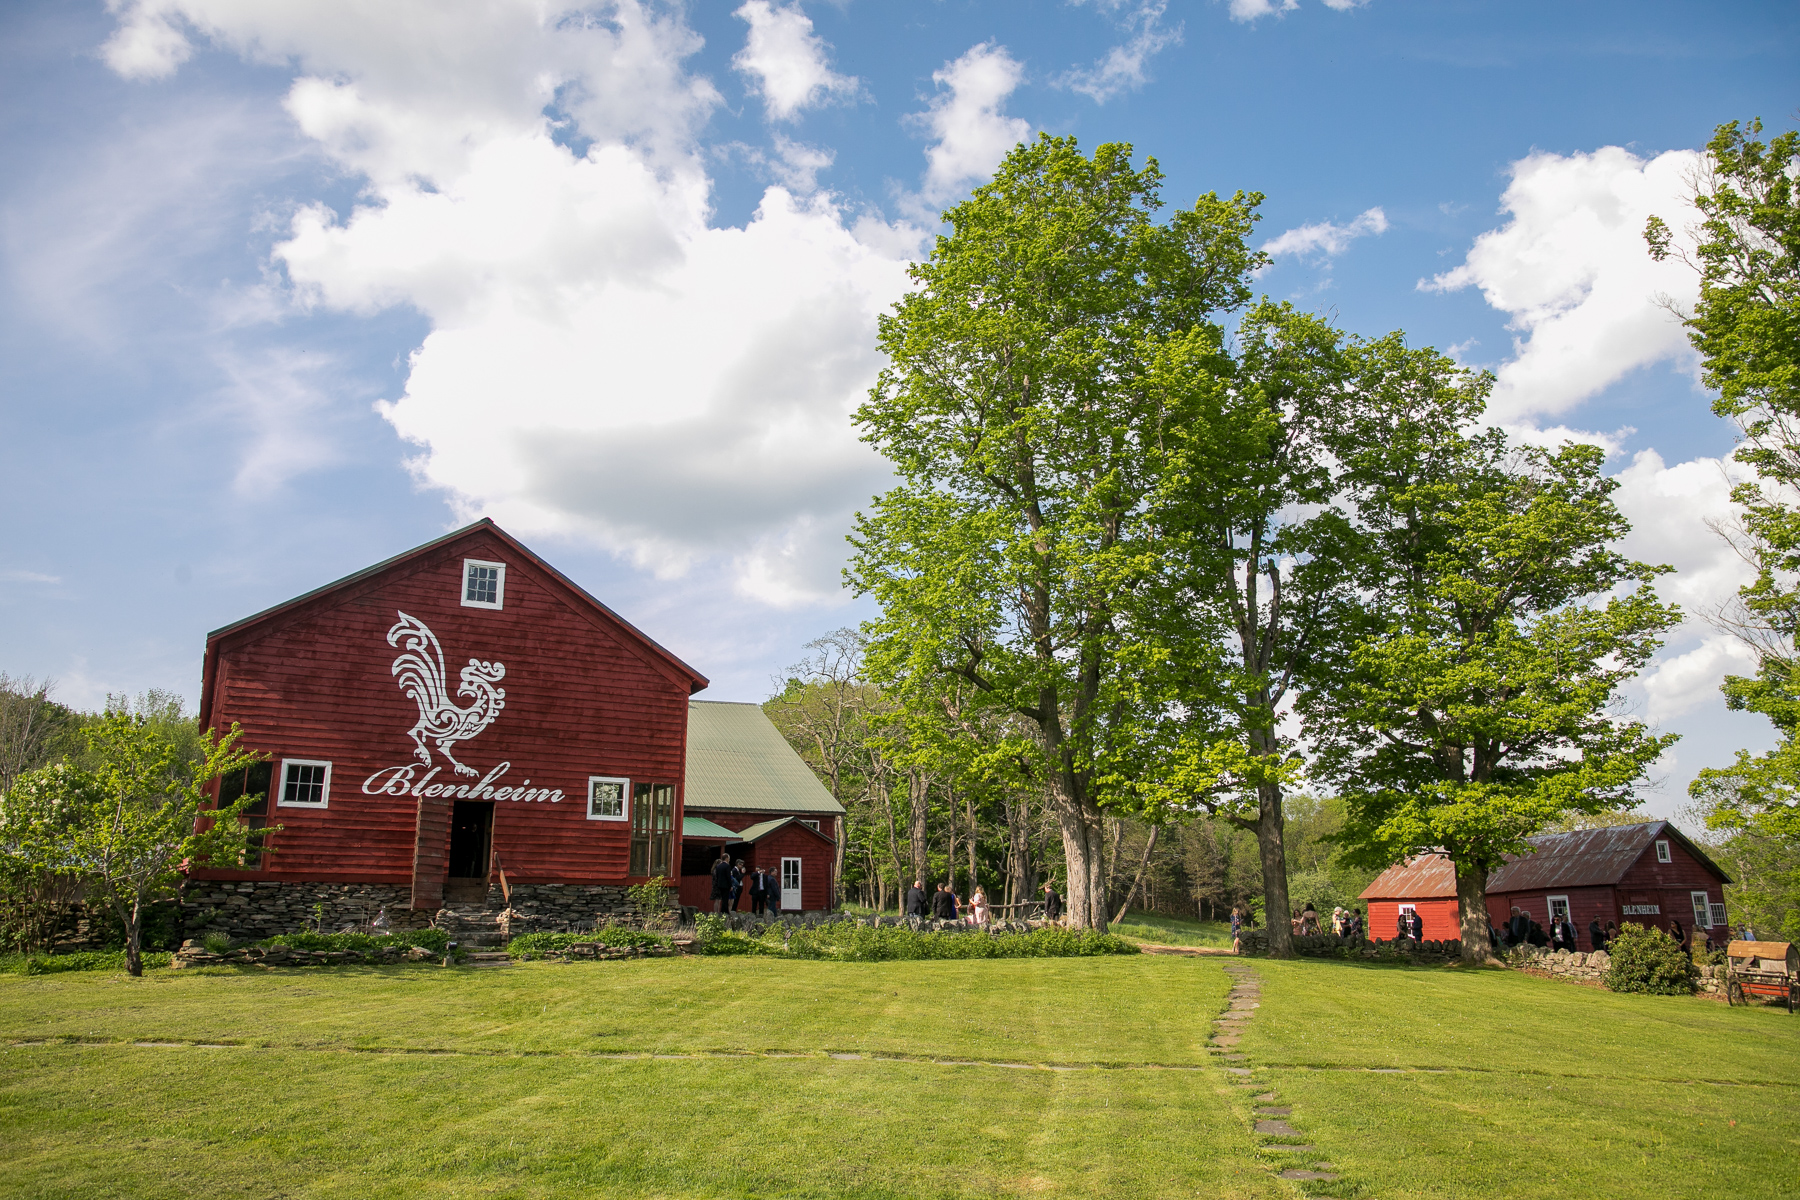 A panoramic view of the property at Blenheim Hill Farm.